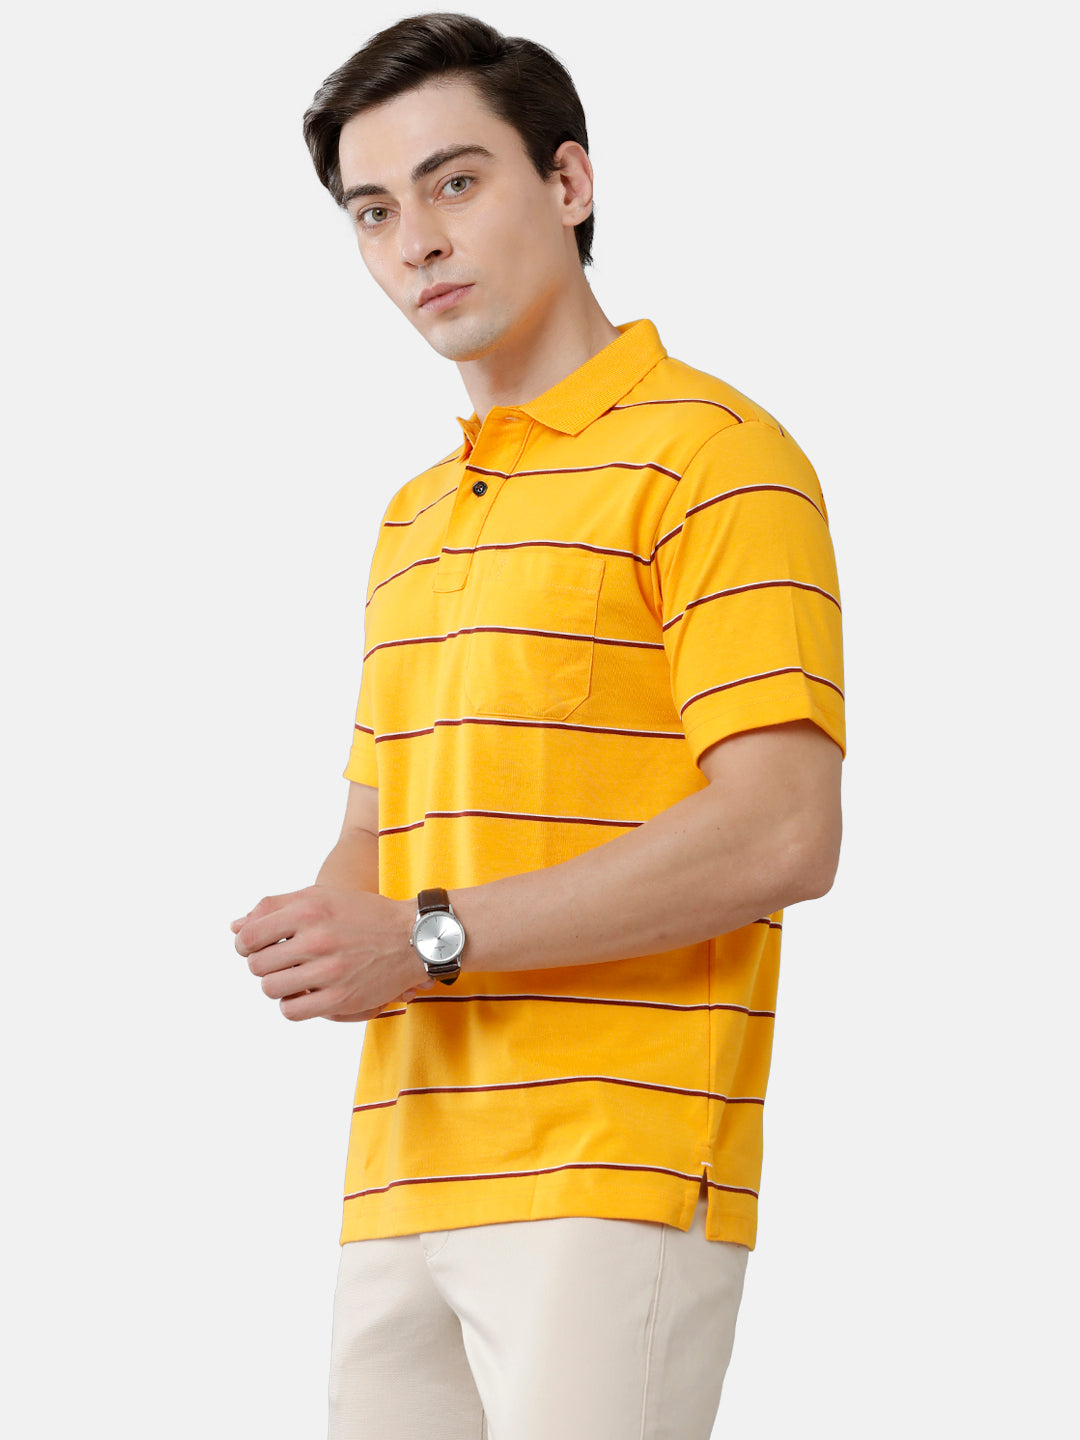 Classic Polo Mens Cotton Blend Striped Authentic Fit Polo Neck Yellow Color T-Shirt | Avon 506 A